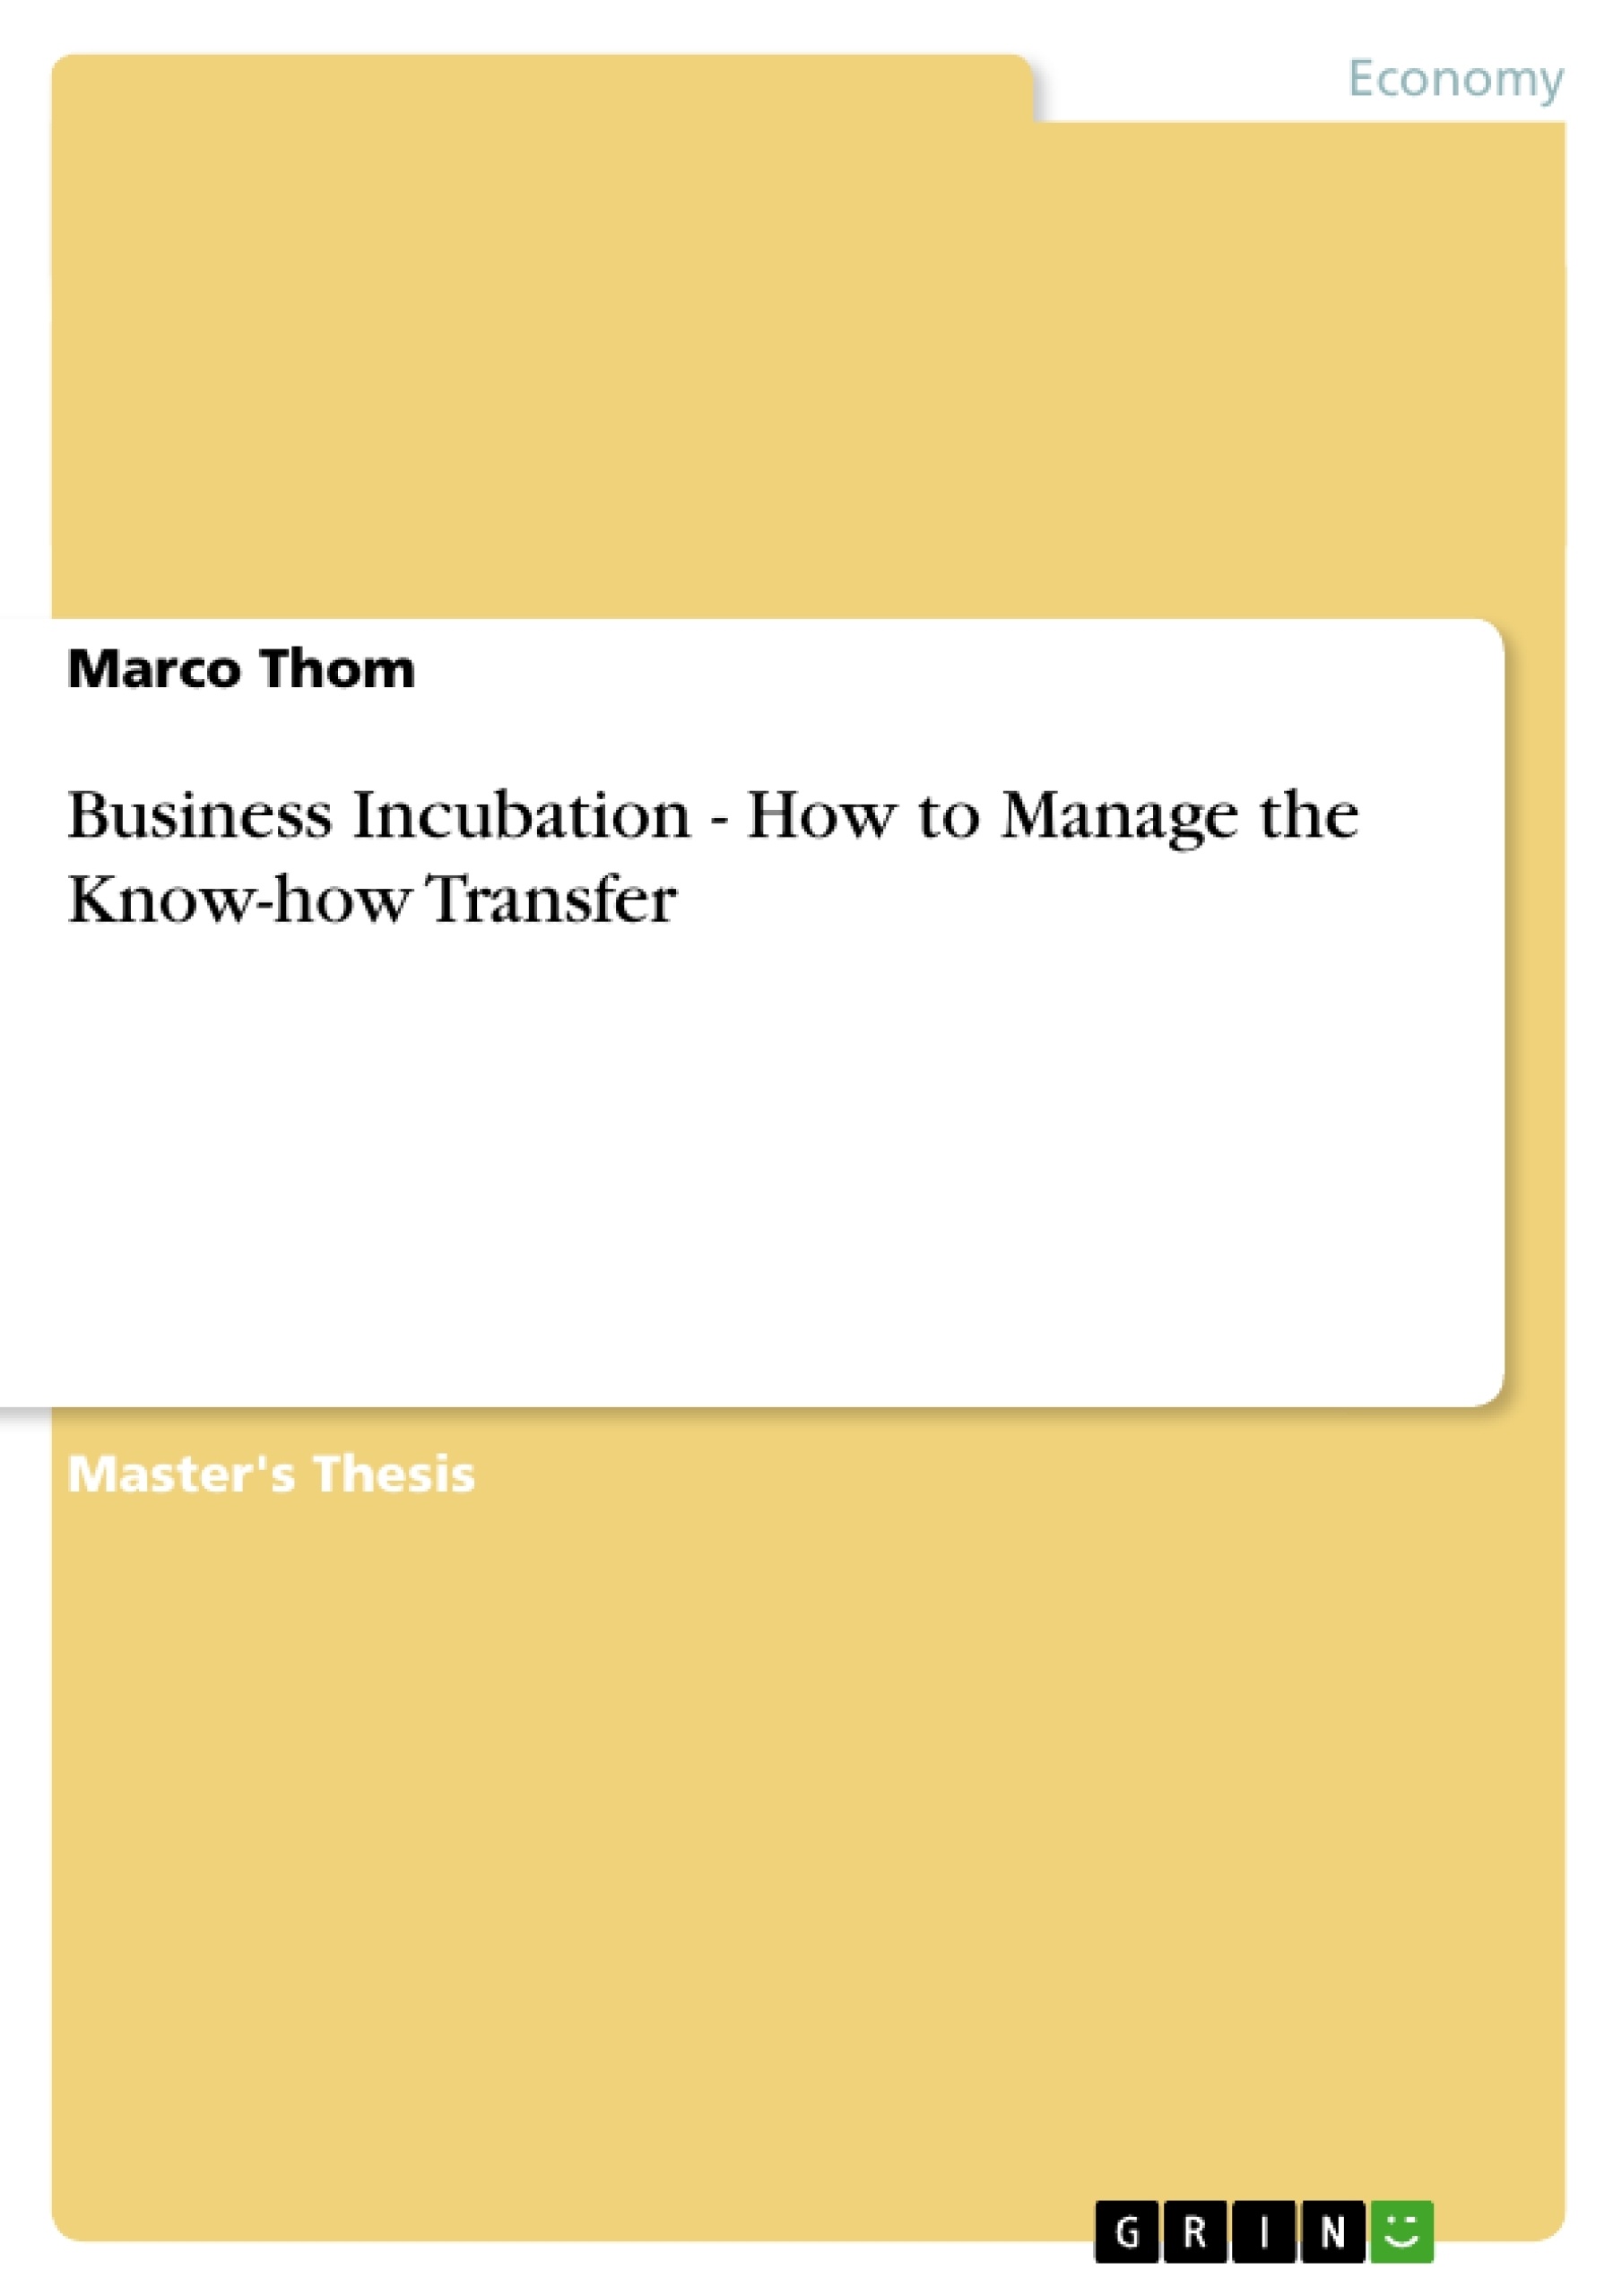 Título: Business Incubation - How to Manage the Know-how Transfer